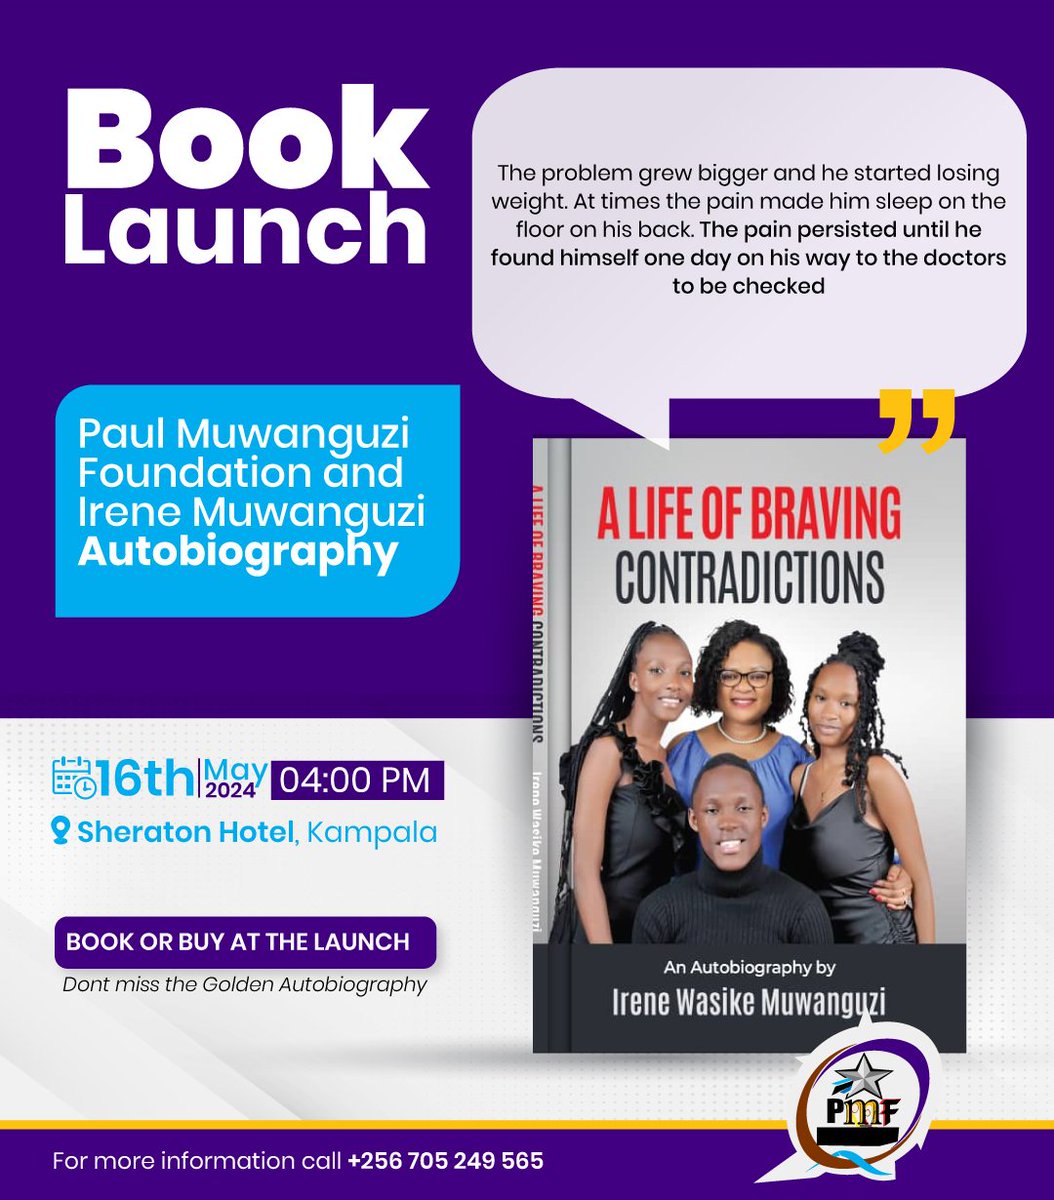 Join us at the Sheraton Hotel in Kampala on May 16th for an unforgettable journey through triumph and perseverance. Reserve your seat for the launch of 'A Life Of Braving Contradictions' at muwanguzifund.com. #TrueStory #Biography #Insipiration #NextRadioUG